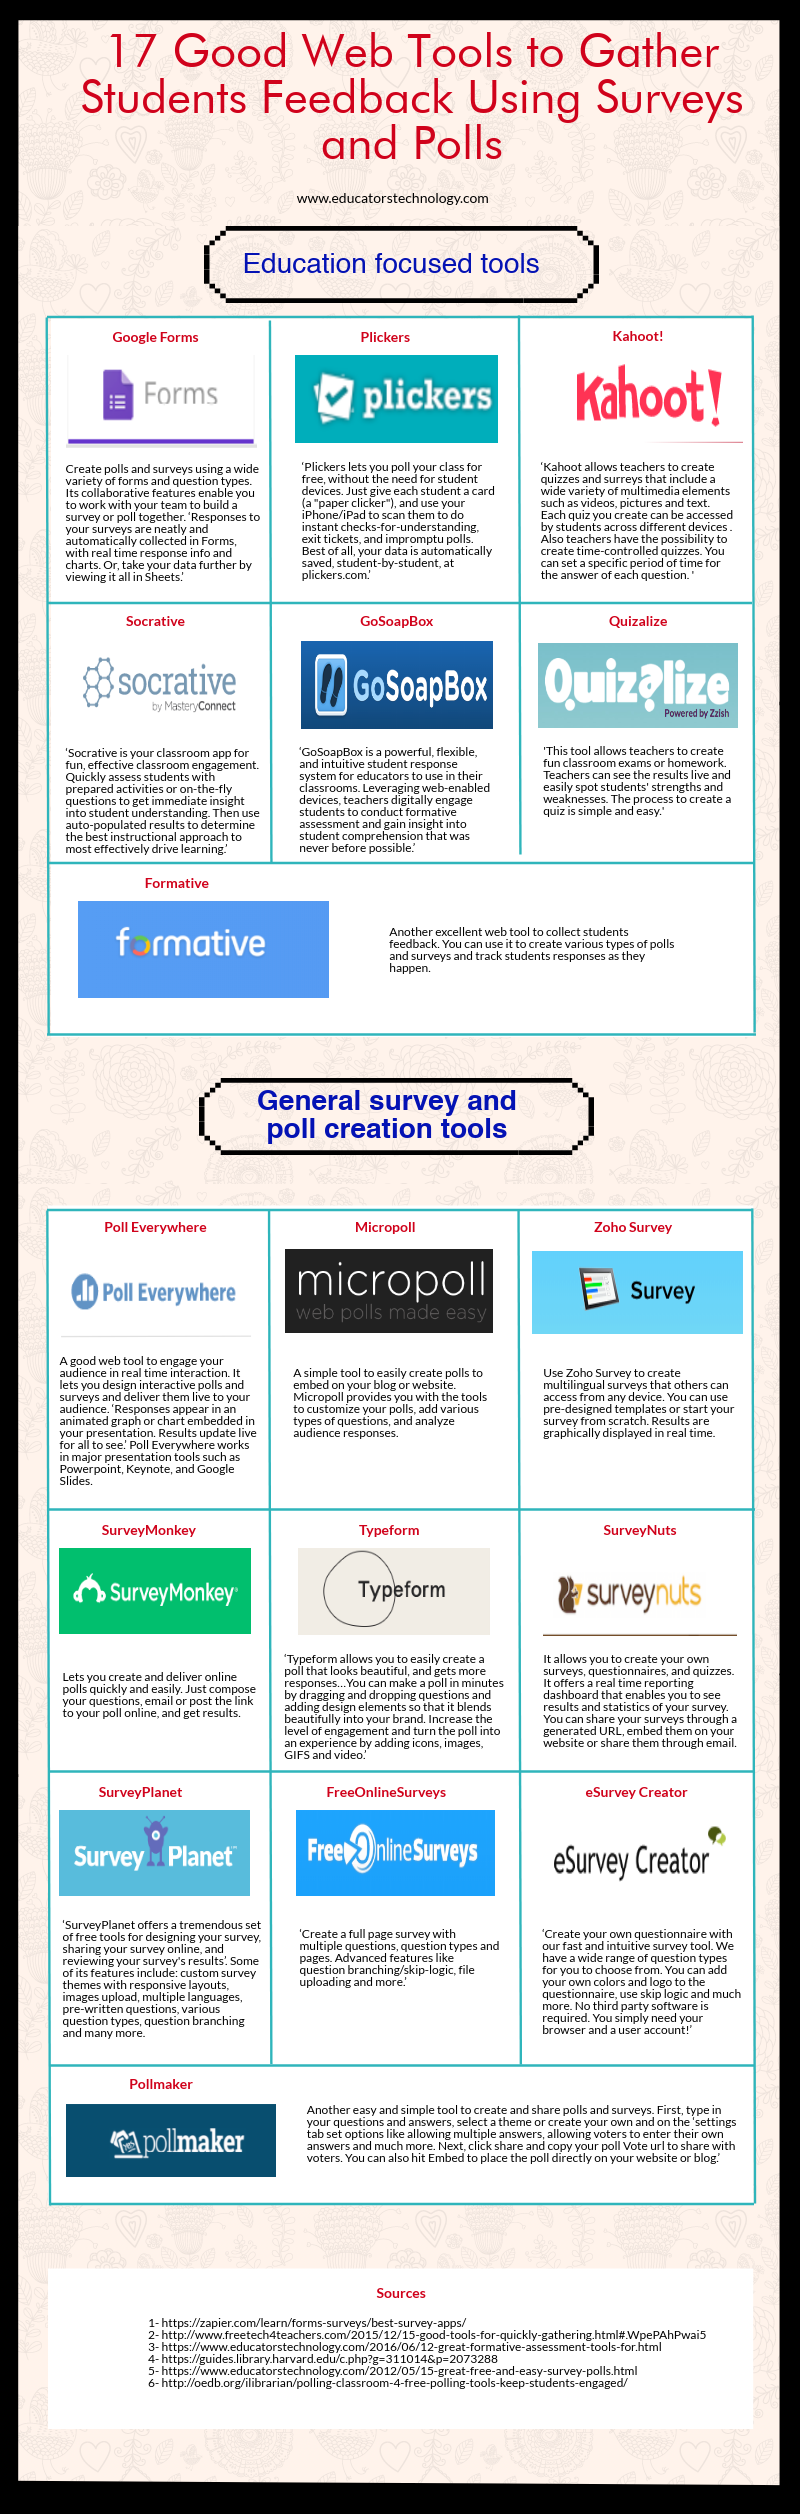 A Handy Visual Featuring 17 Good Web Tools to Gather Students Feedback Using Surveys and Polls